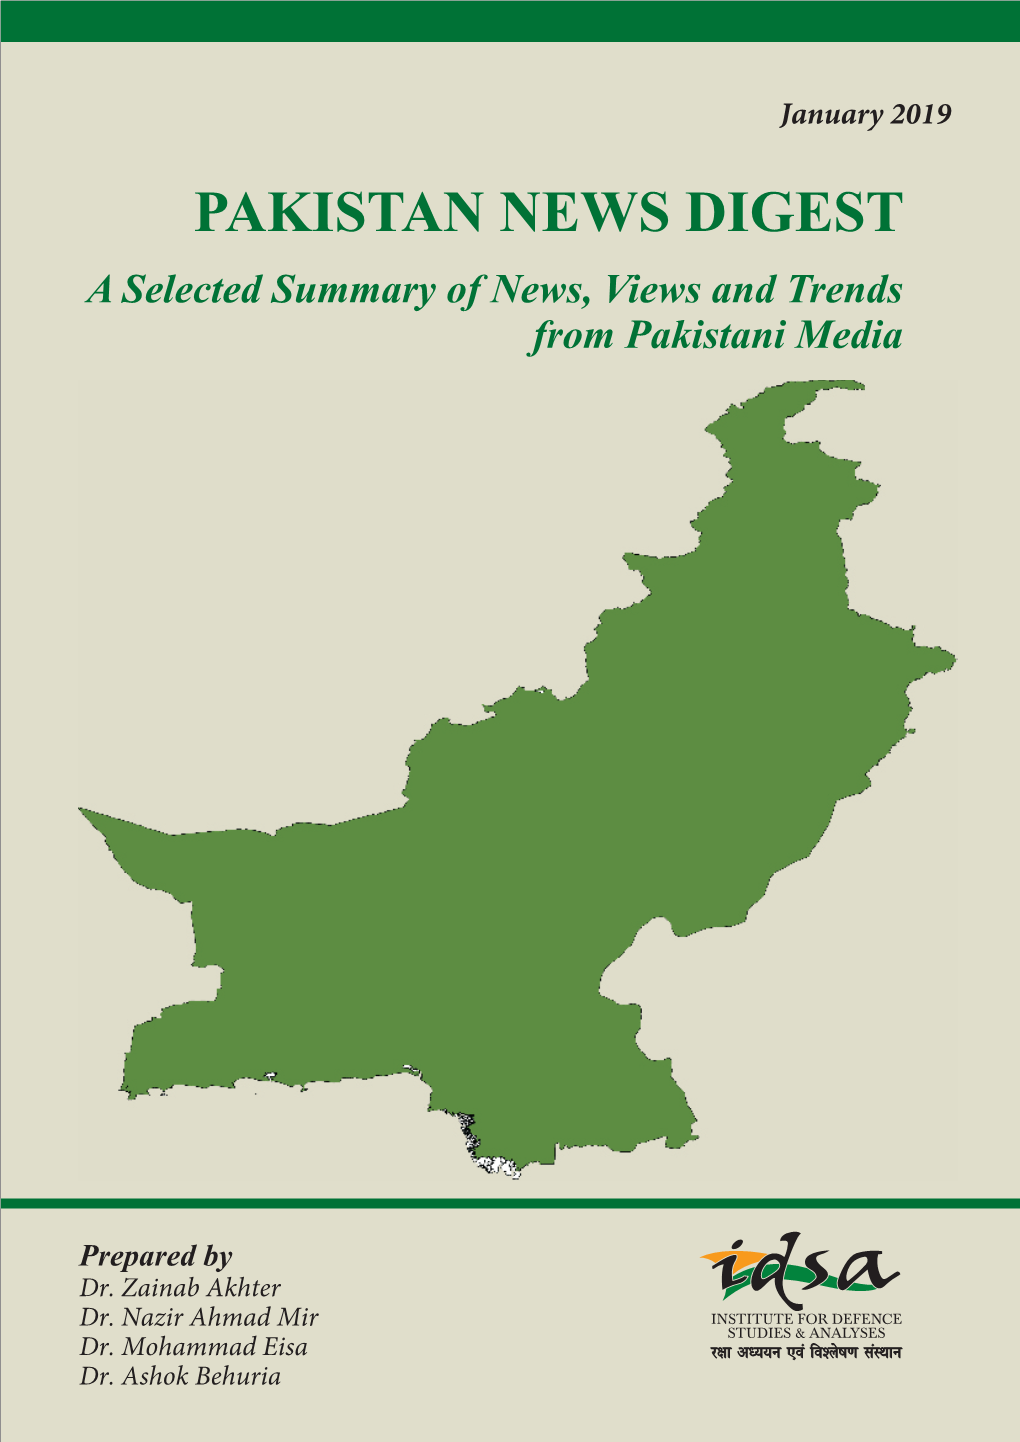 January 2019 PAKISTAN NEWS DIGEST a Selected Summary of News, Views and Trends from Pakistani Media